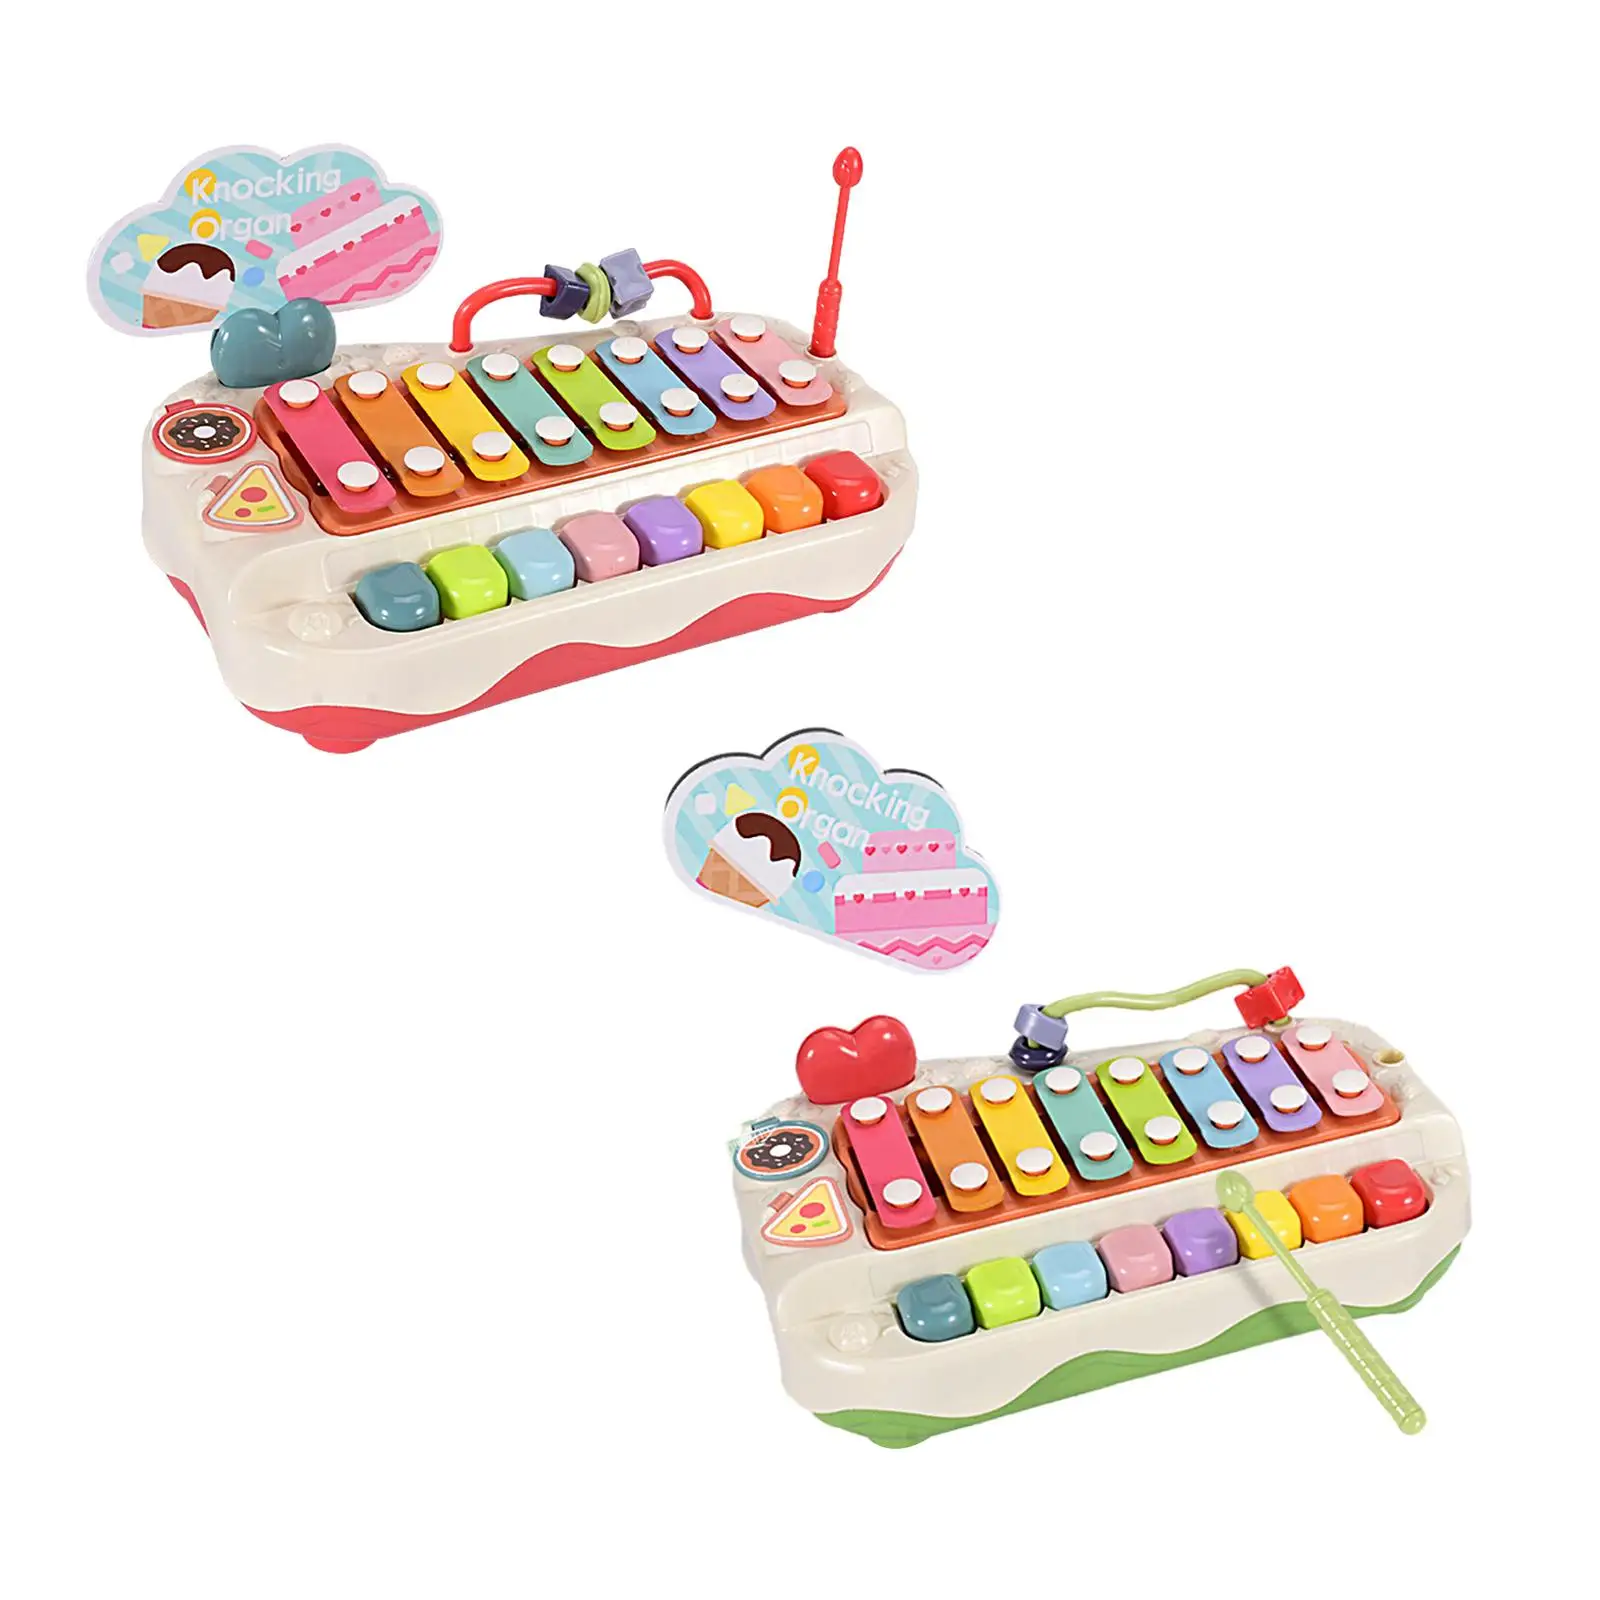 Kids Musical Toy Learning Toy Piano Toy Baby Piano Xylophone Toy for Toddler Baby 1 2 3 Years Old Kids Boy Girls Birthday Gift